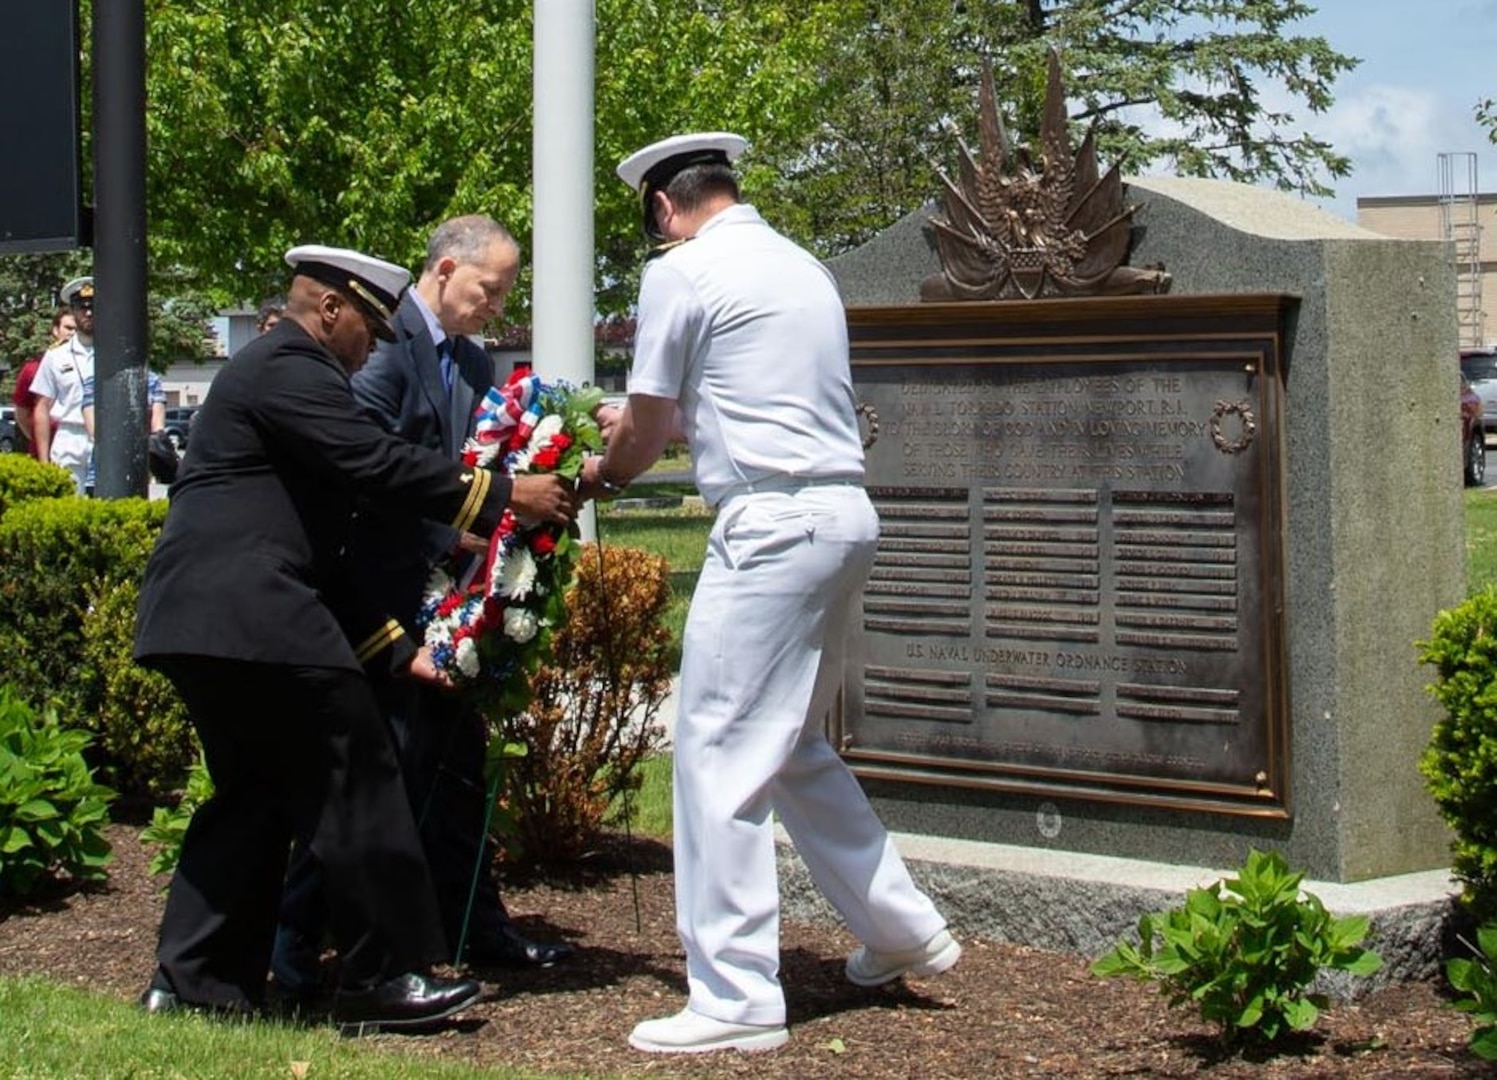 NAVSTA chaplain brings message of remembering America’s past, improving future to Division Newport Memorial Day ceremony